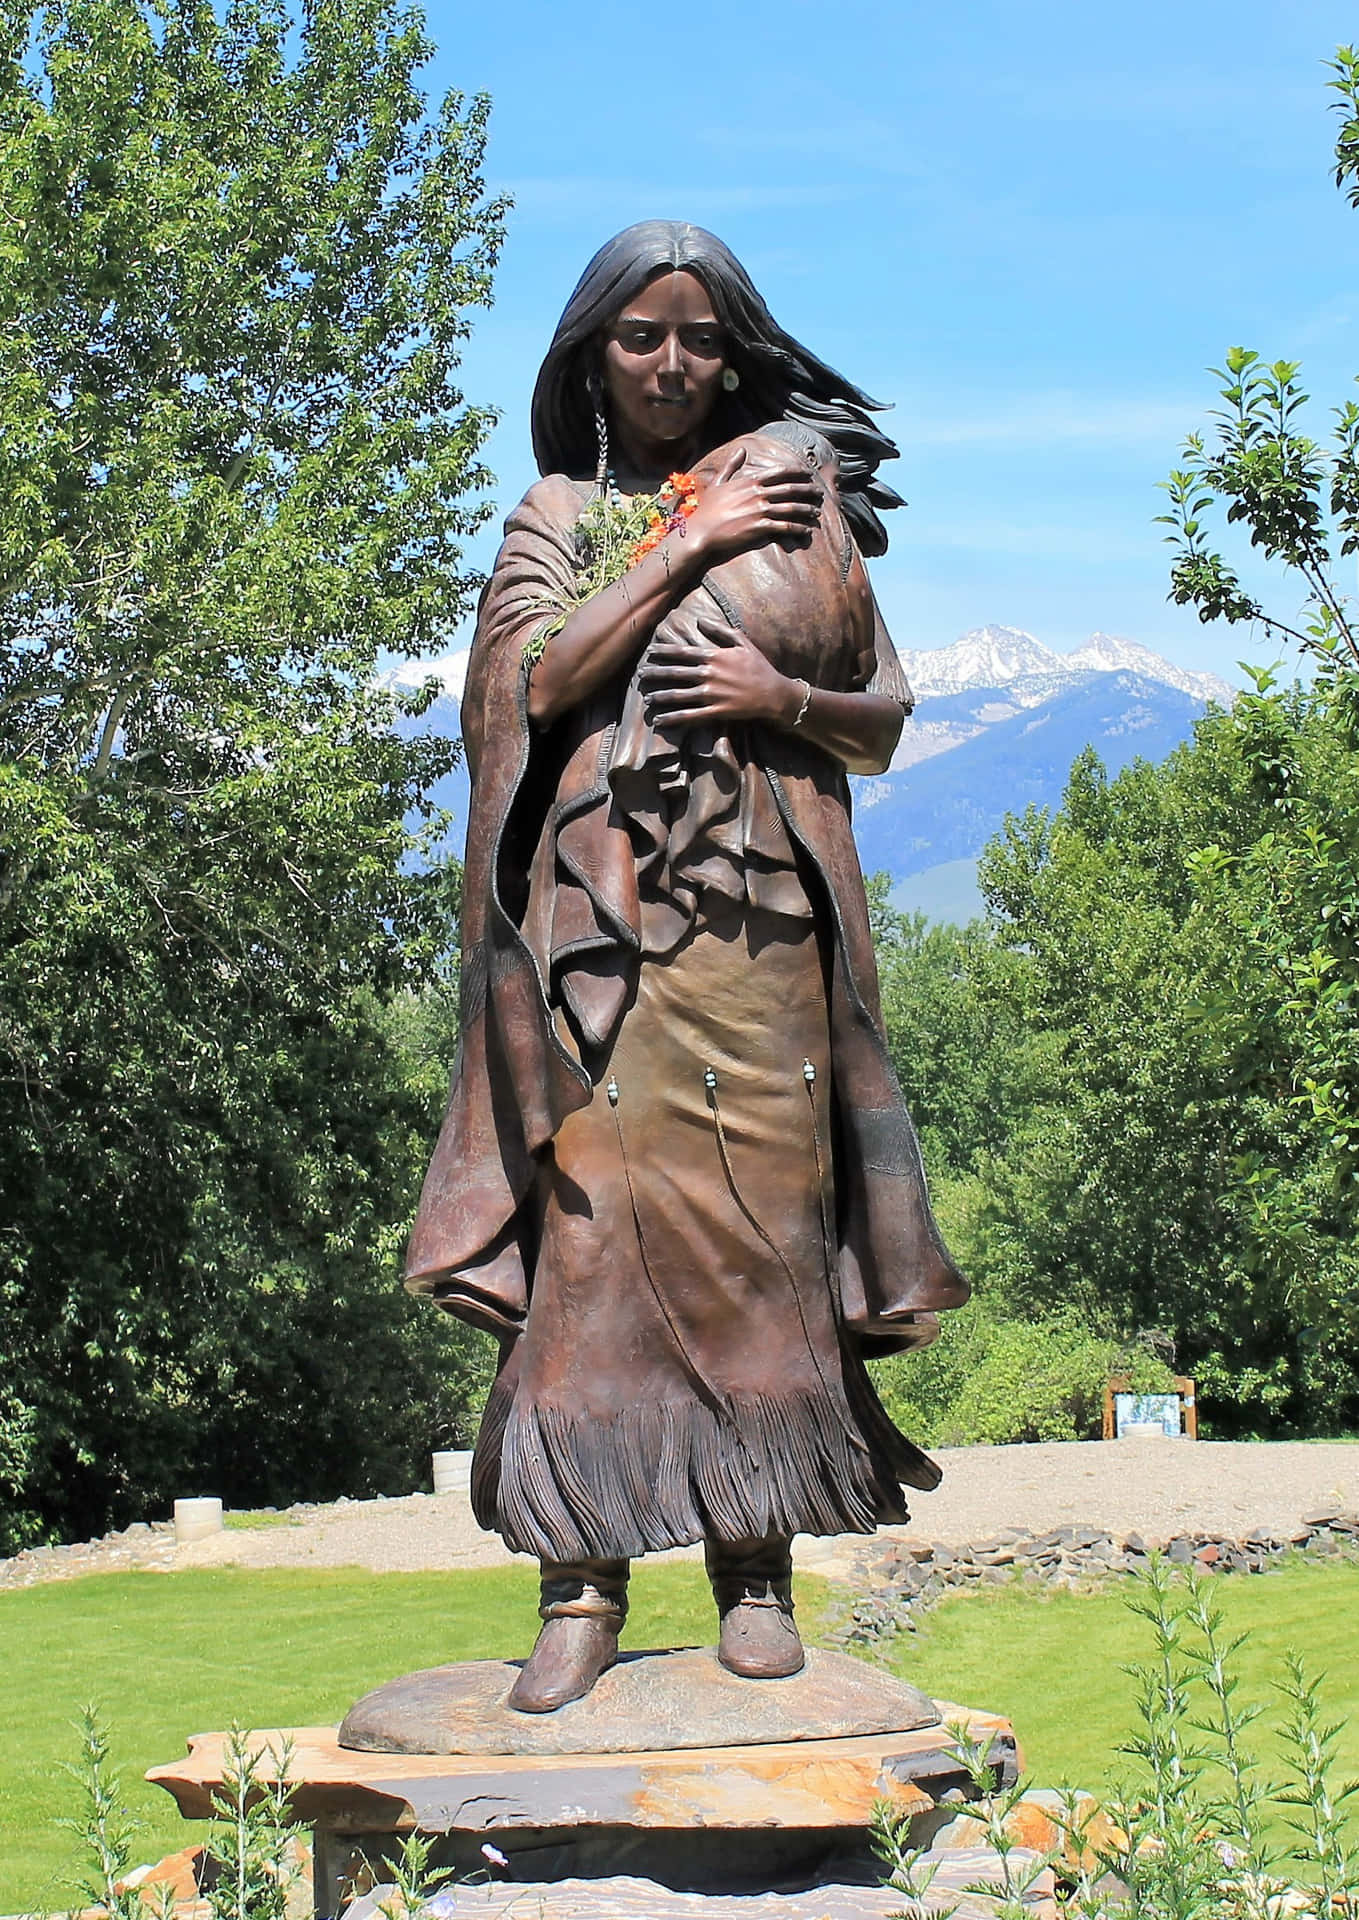 A Statue Of A Woman Holding A Baby